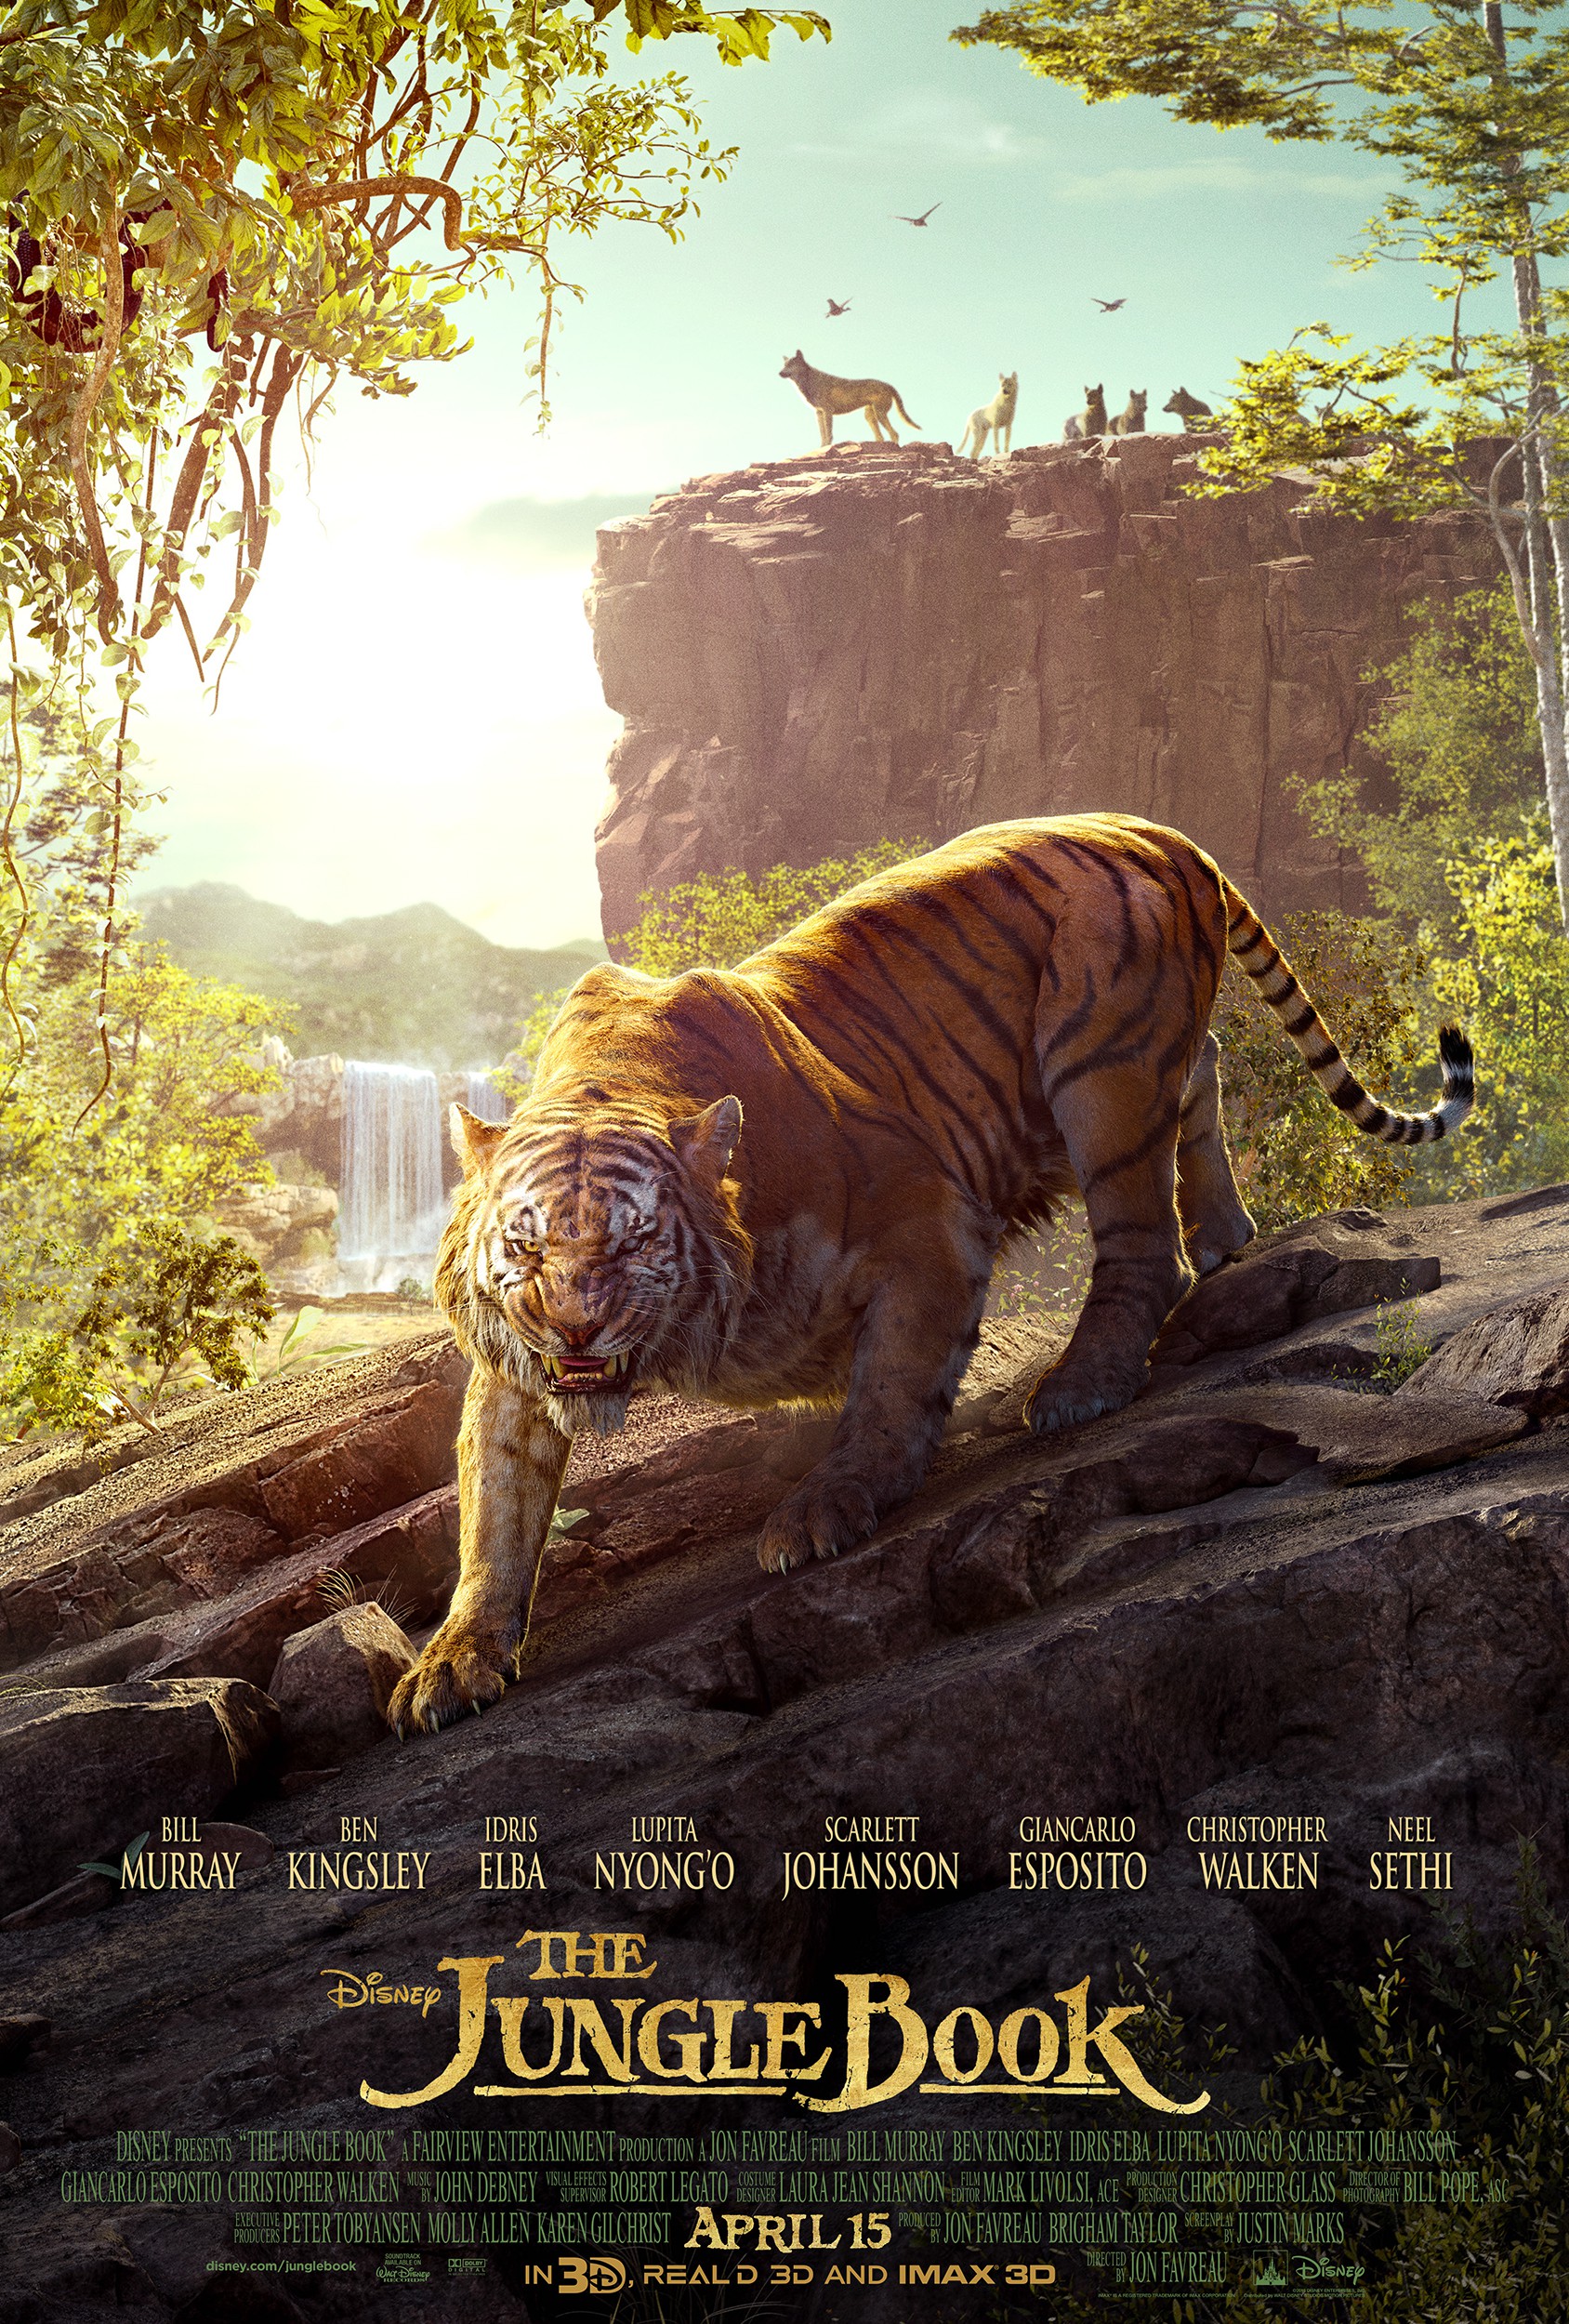 Bengal Tiger (2015) movie posters